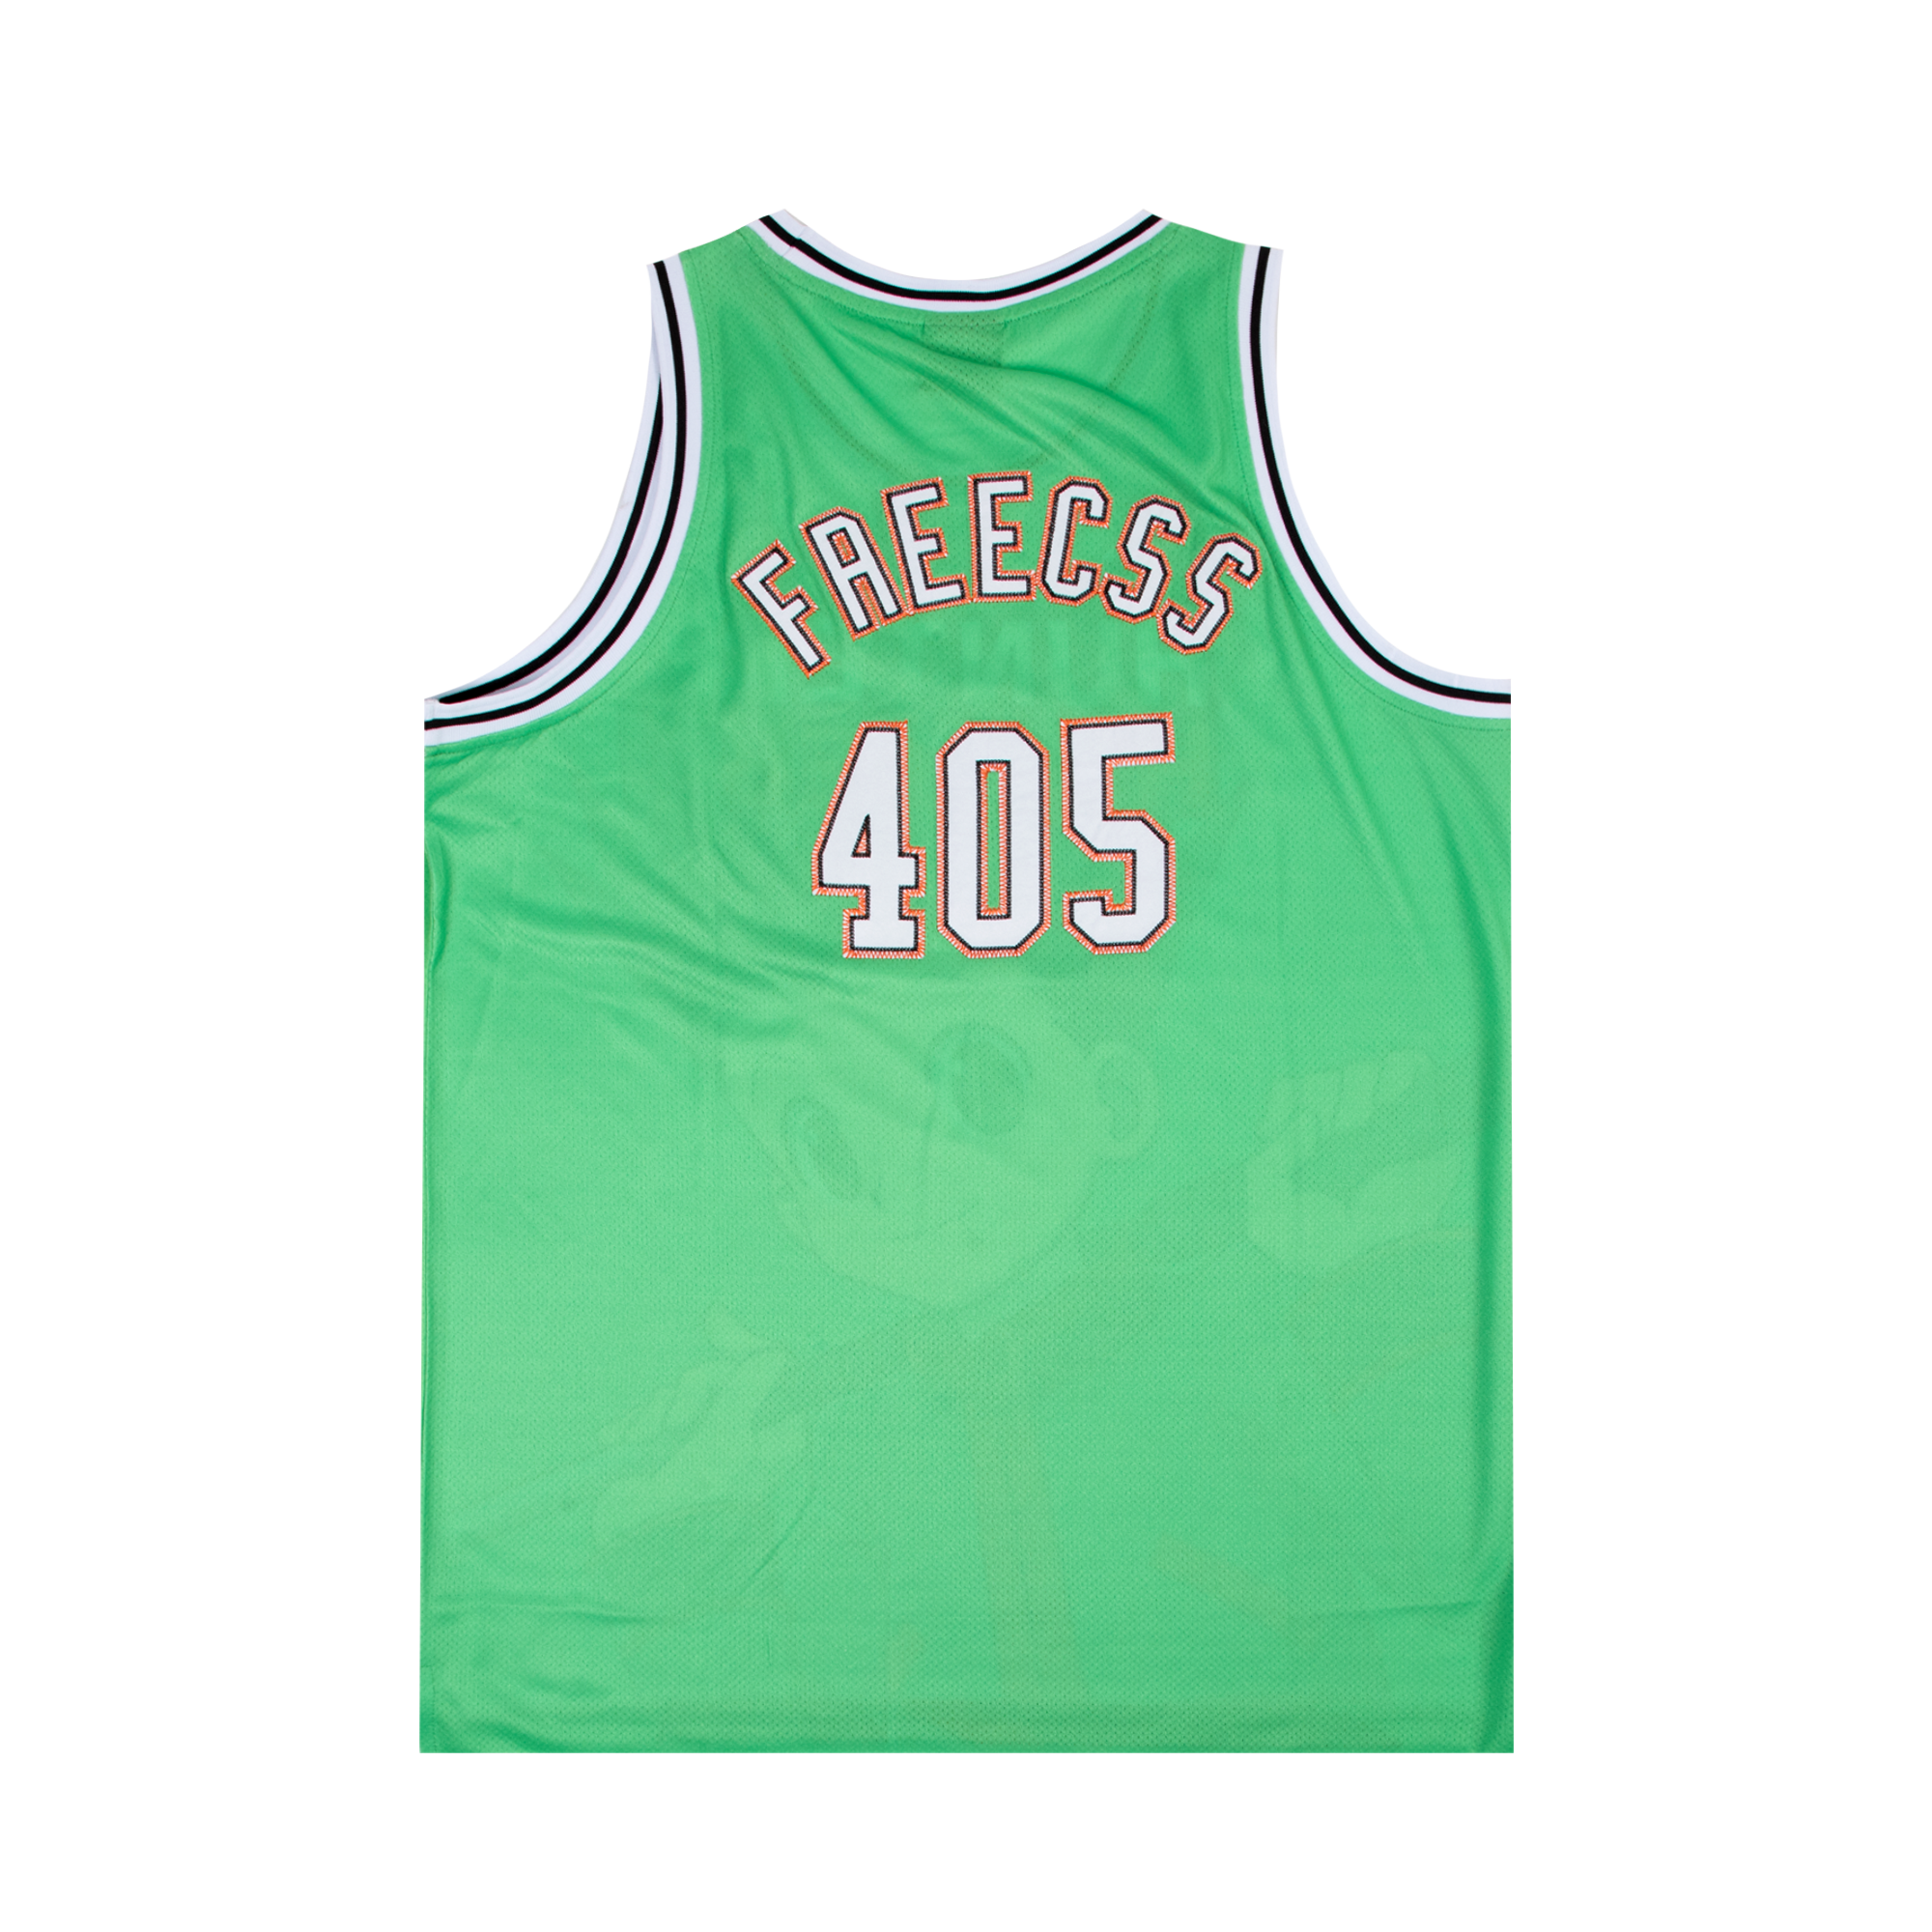 Applicant 405 Gon Freecss Jersey